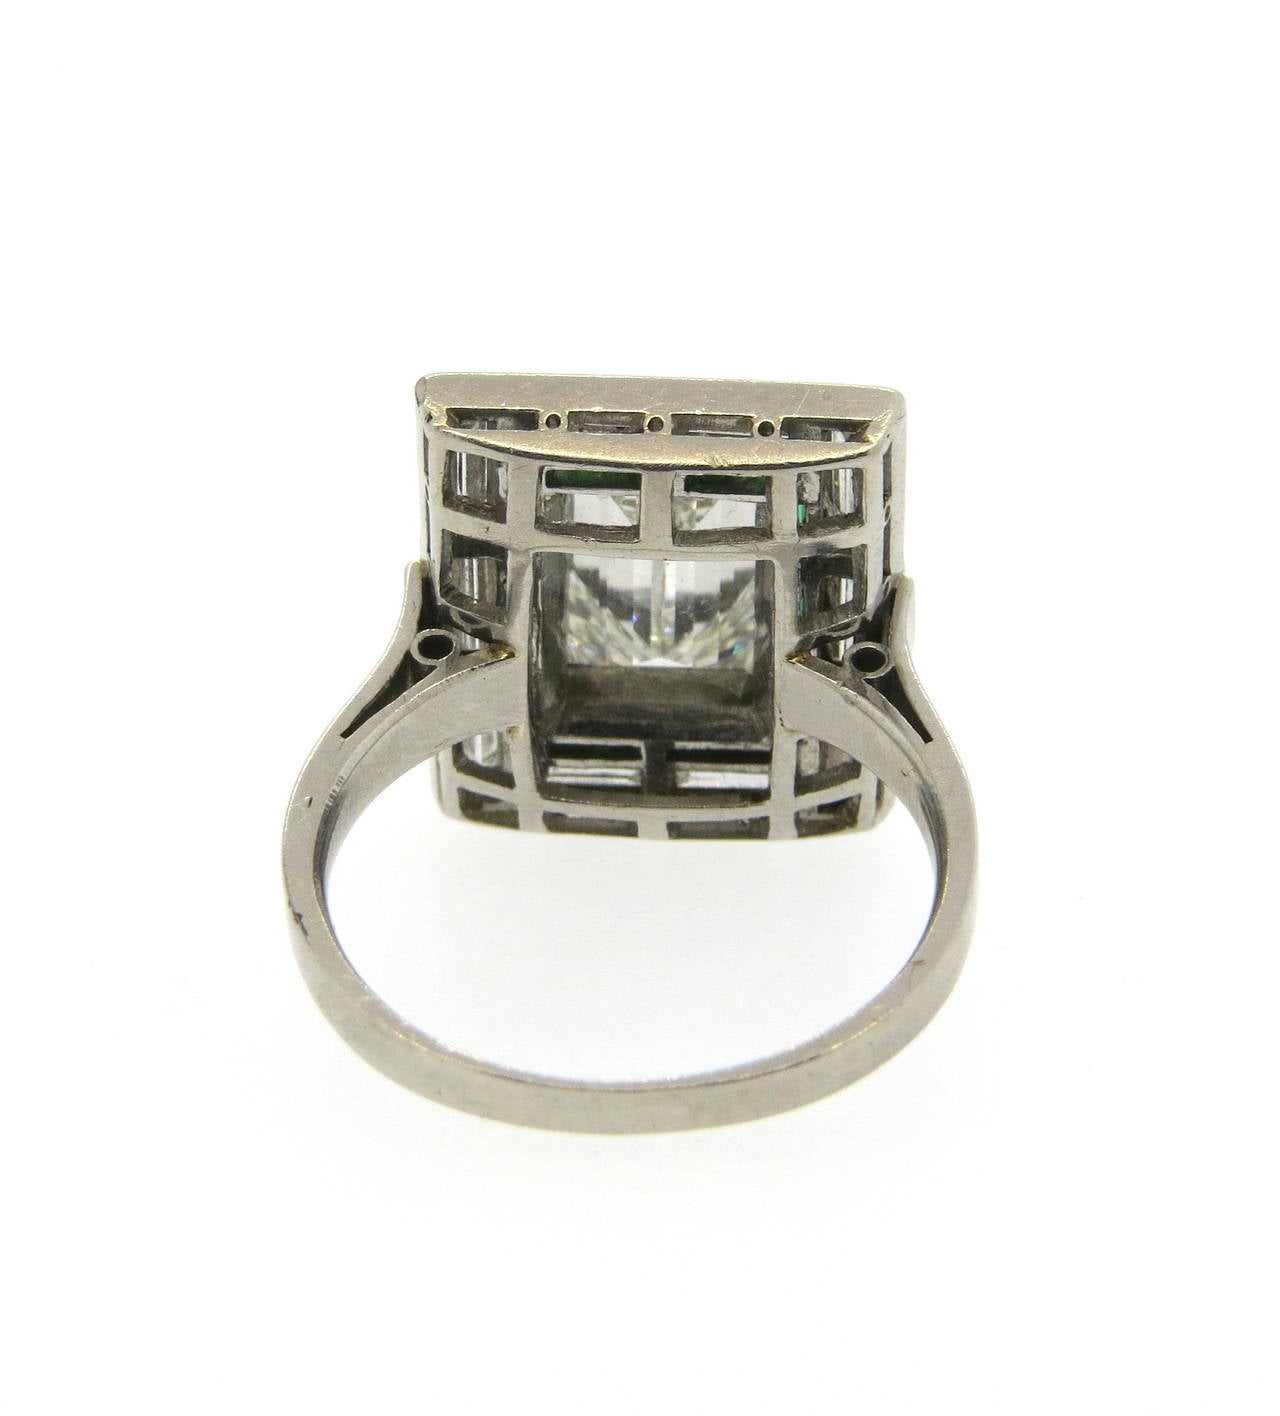 1920s Art Deco platinum engagement ring, featuring an emerald cut center diamond, approximately 2ct VS1-H, surrounded with ten baguette cut diamonds and emeralds. Ring is a size 6 3/4, ring top is 17mm x 15mm. Weight - 8.8 grams